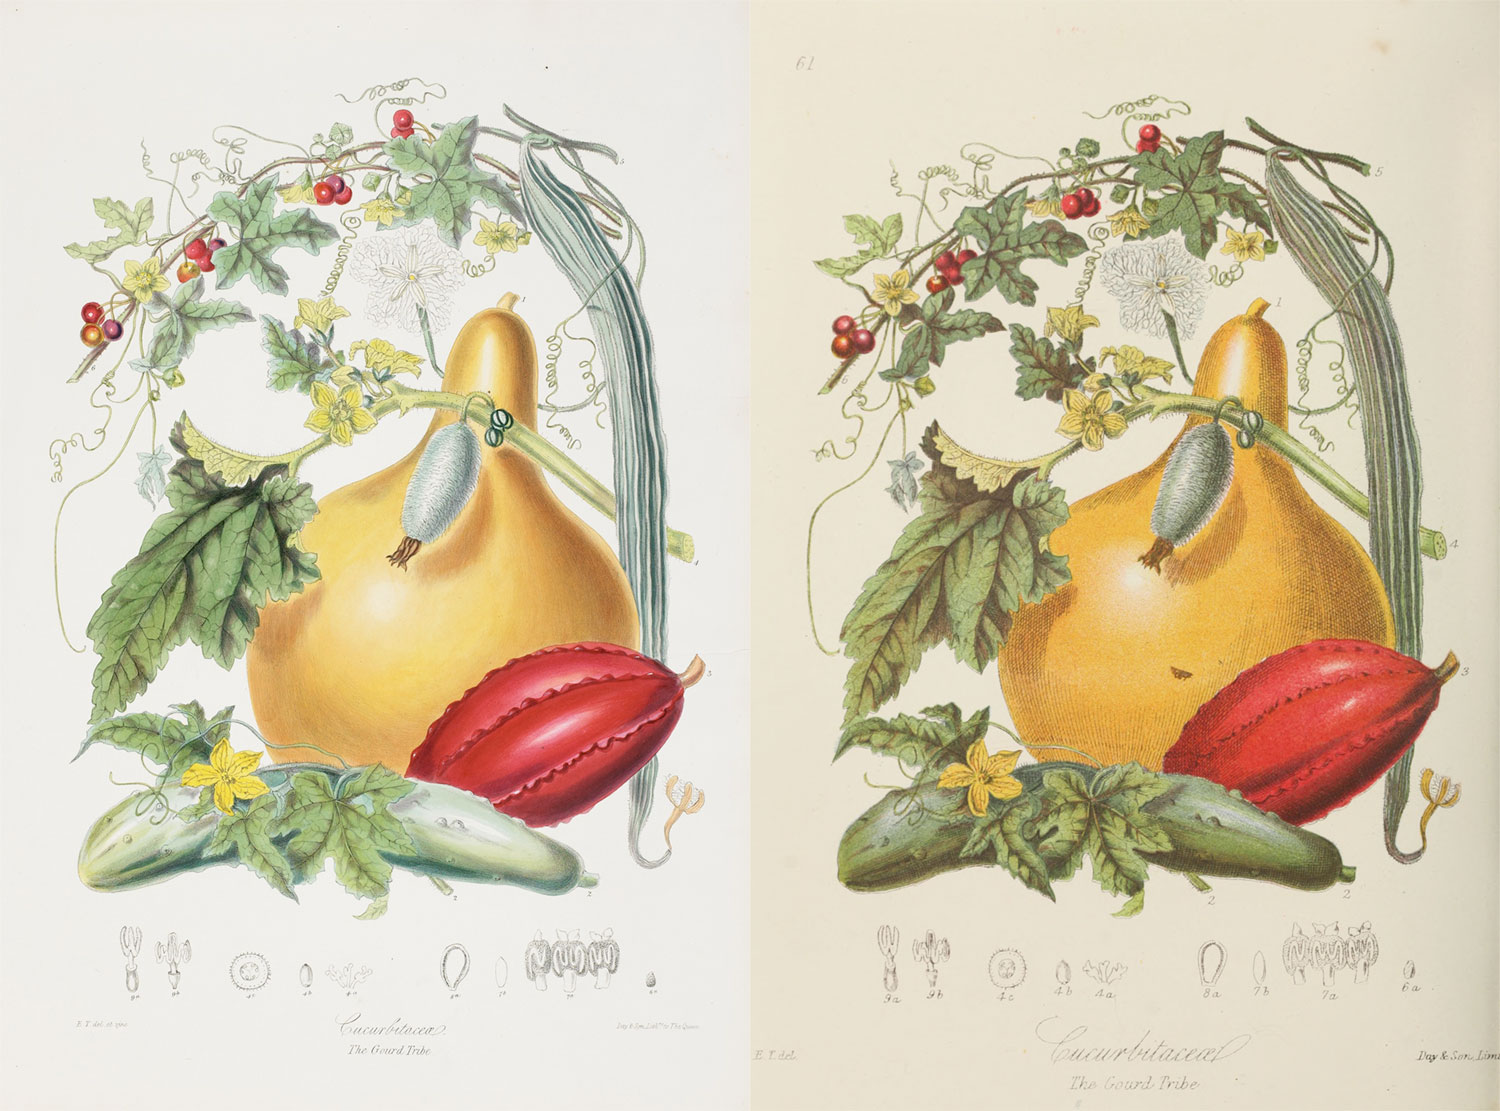 Side-by-side comparison of the original lithograph (left) and reproduction (right) of the gourd tribe